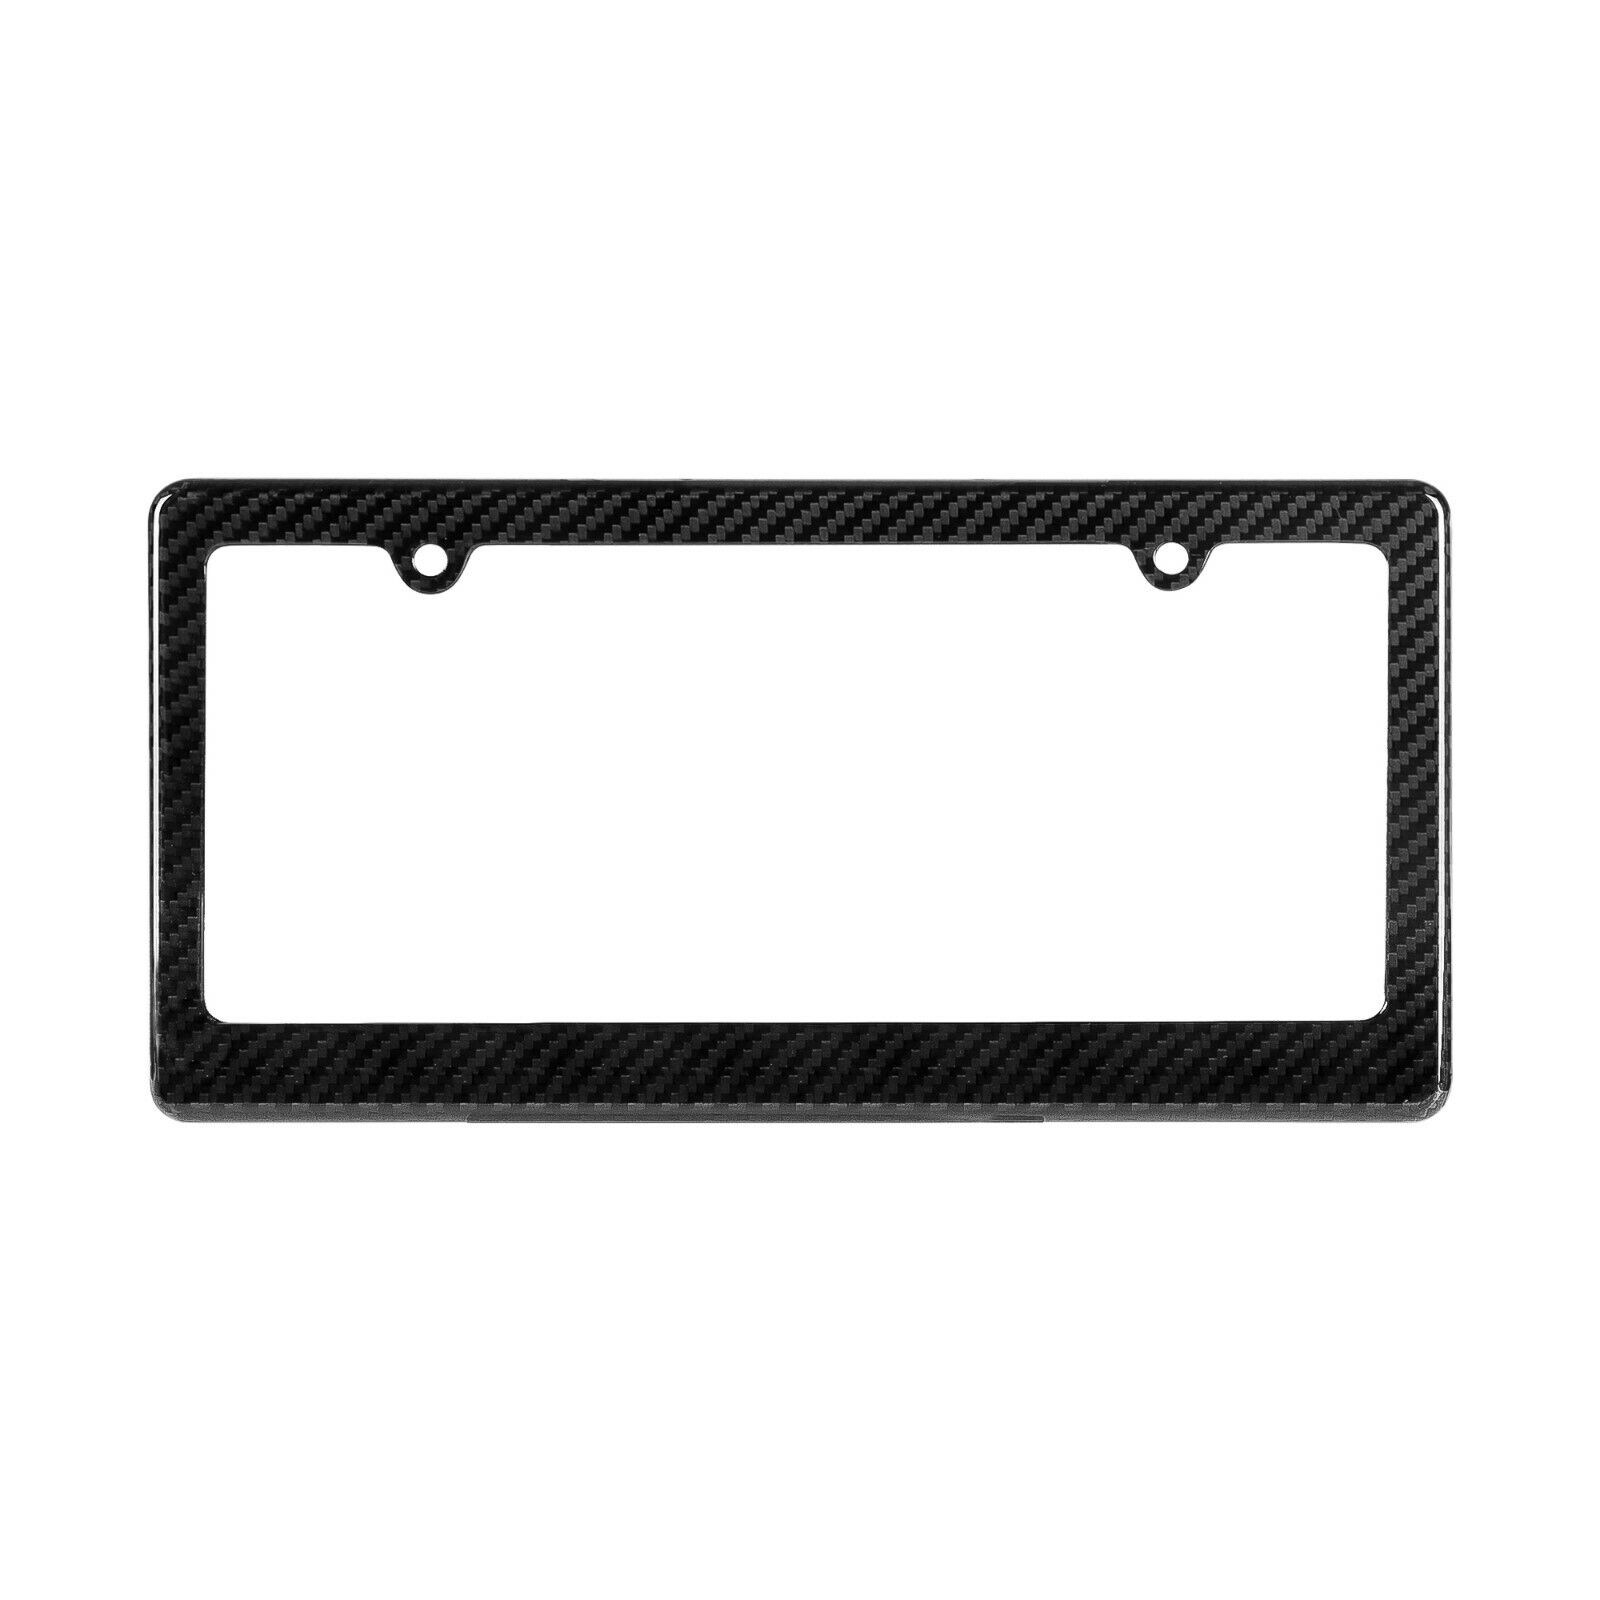 Real Carbon Fiber Thin Top License Plate Frame + Hardware Choose Your Finish